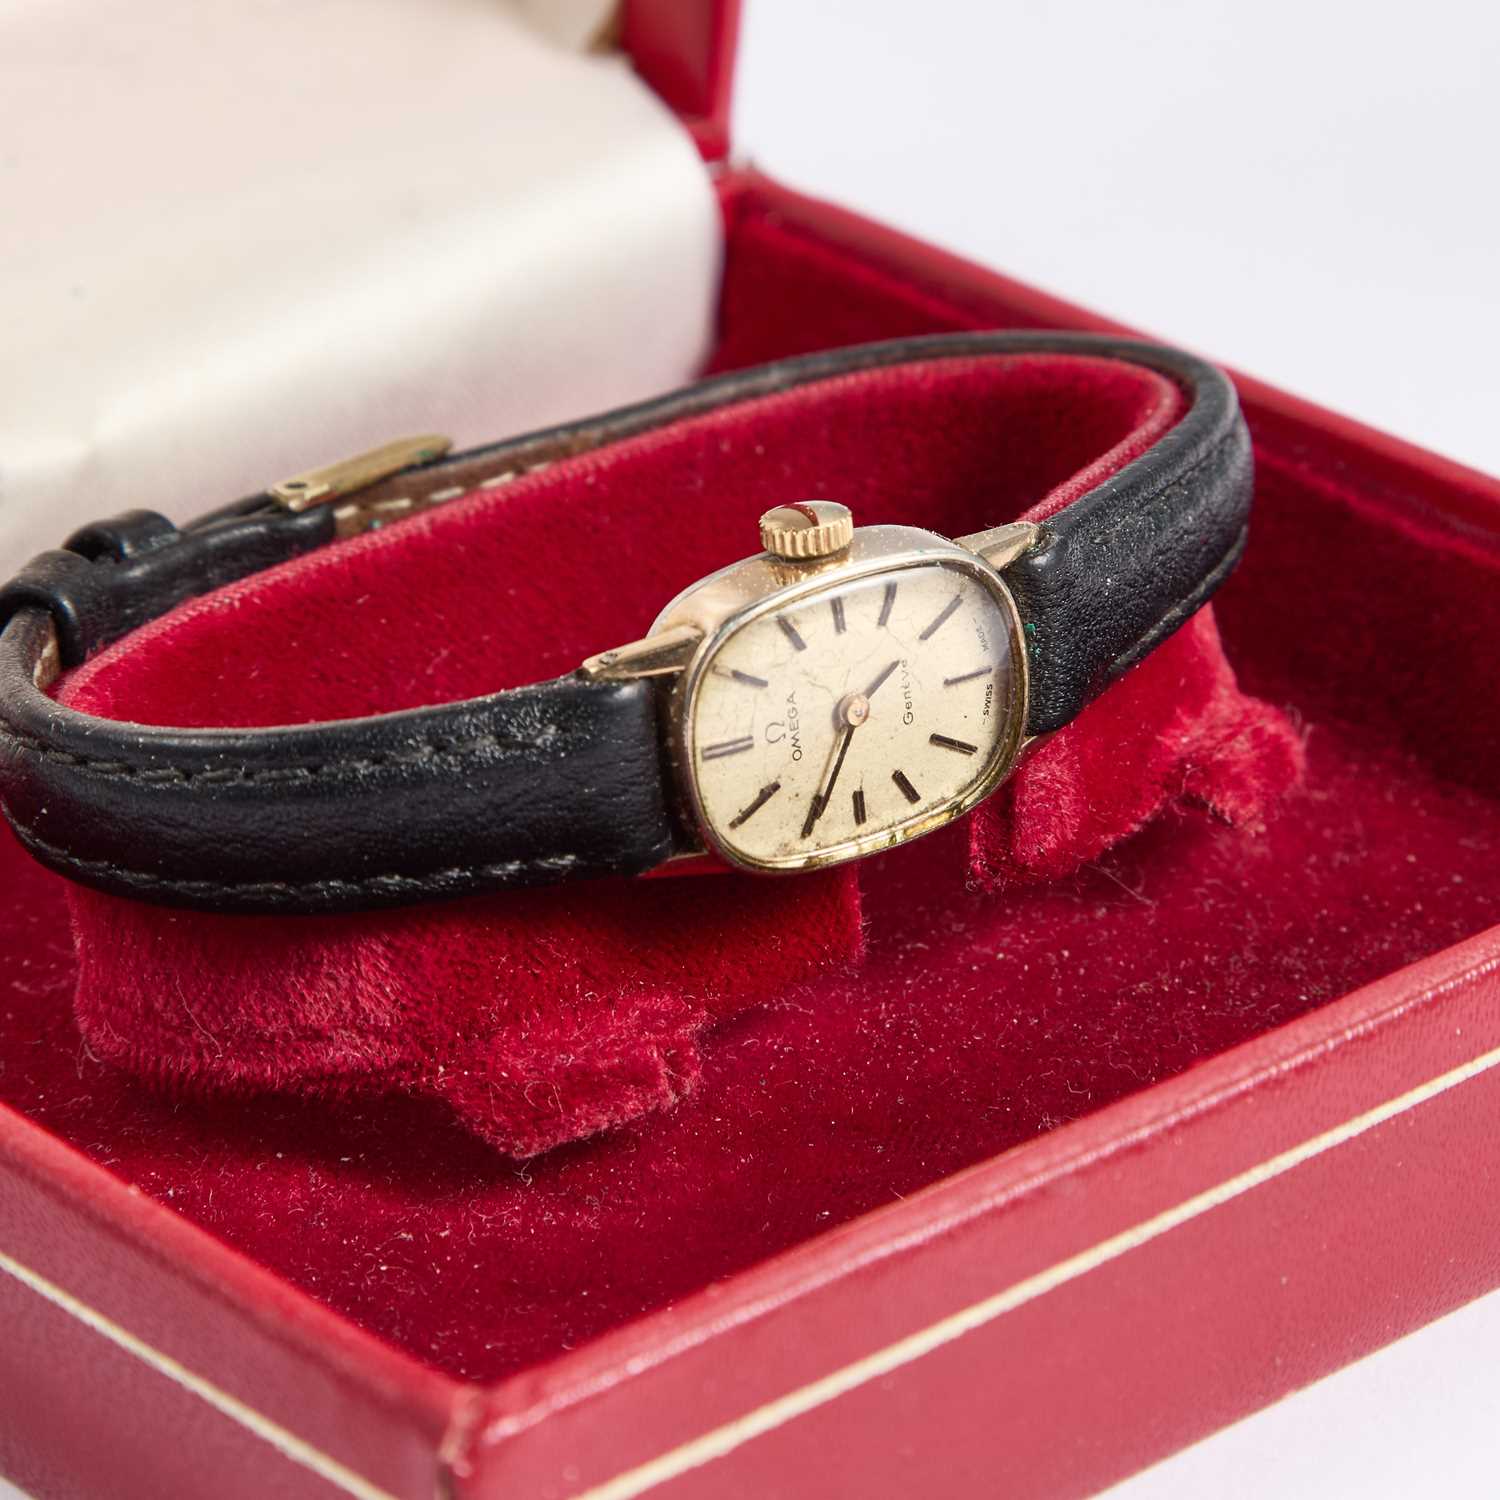 A LADY'S GOLD PLATED OMEGA GENEVE STRAP WATCH - Image 2 of 2